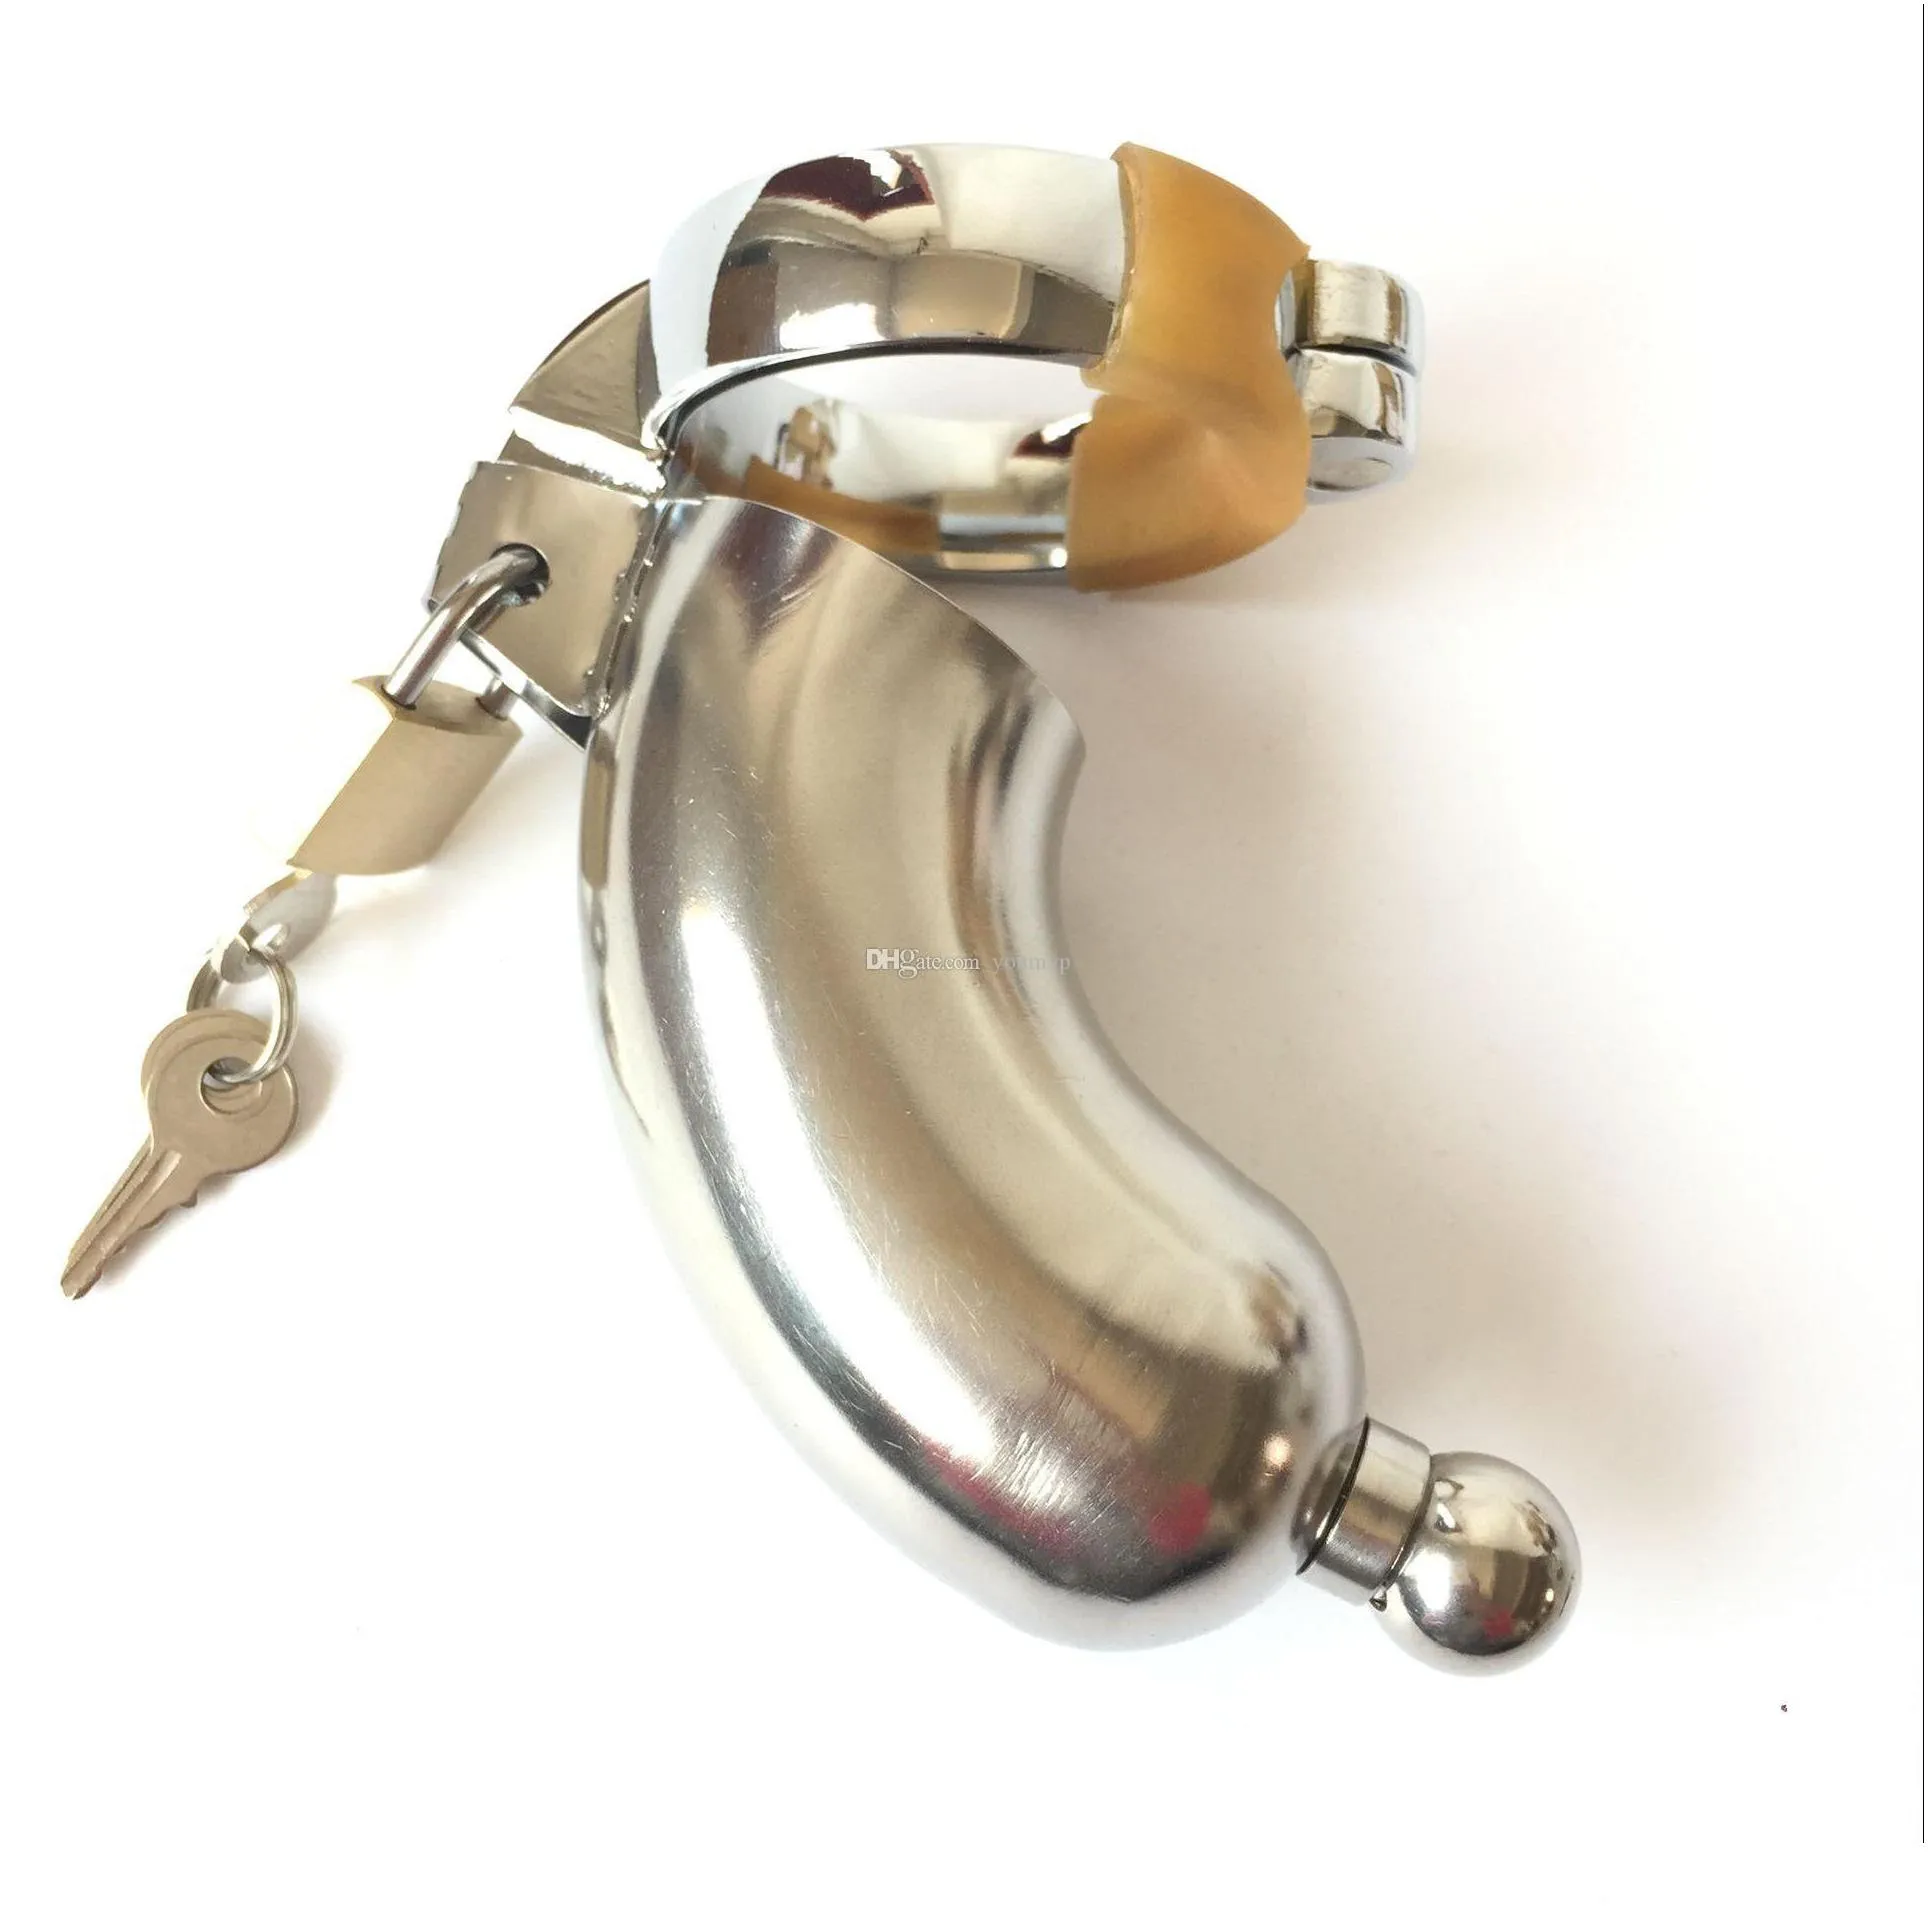 male urethral catheterization penis lock metal chastity device with catheter cb3000 adult toys 40/45/50mm